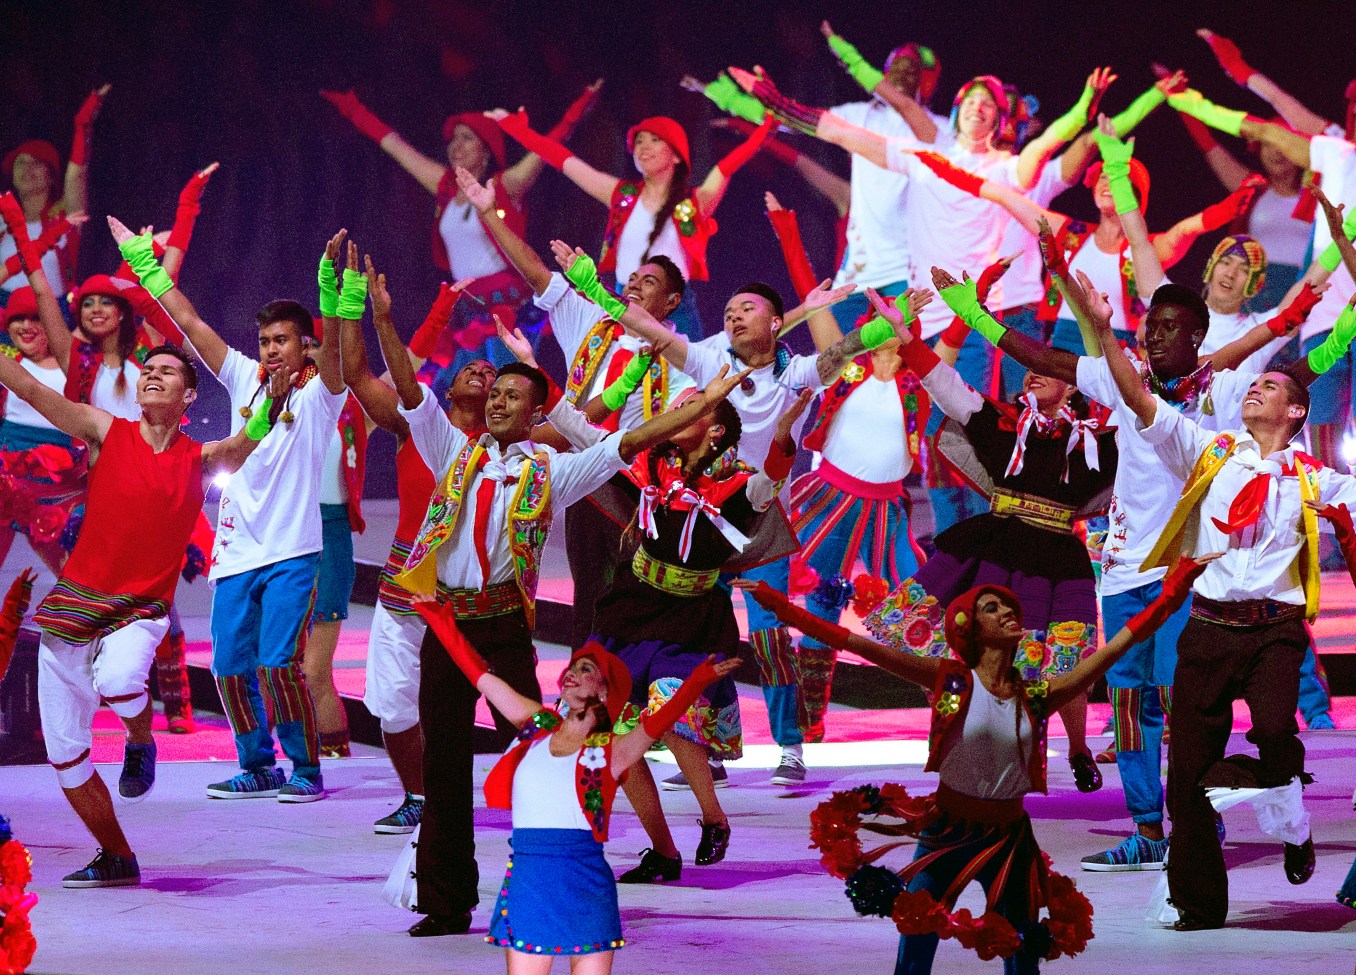 Performers during the closing ceremony of the 2015 Pan Am Games in Toronto